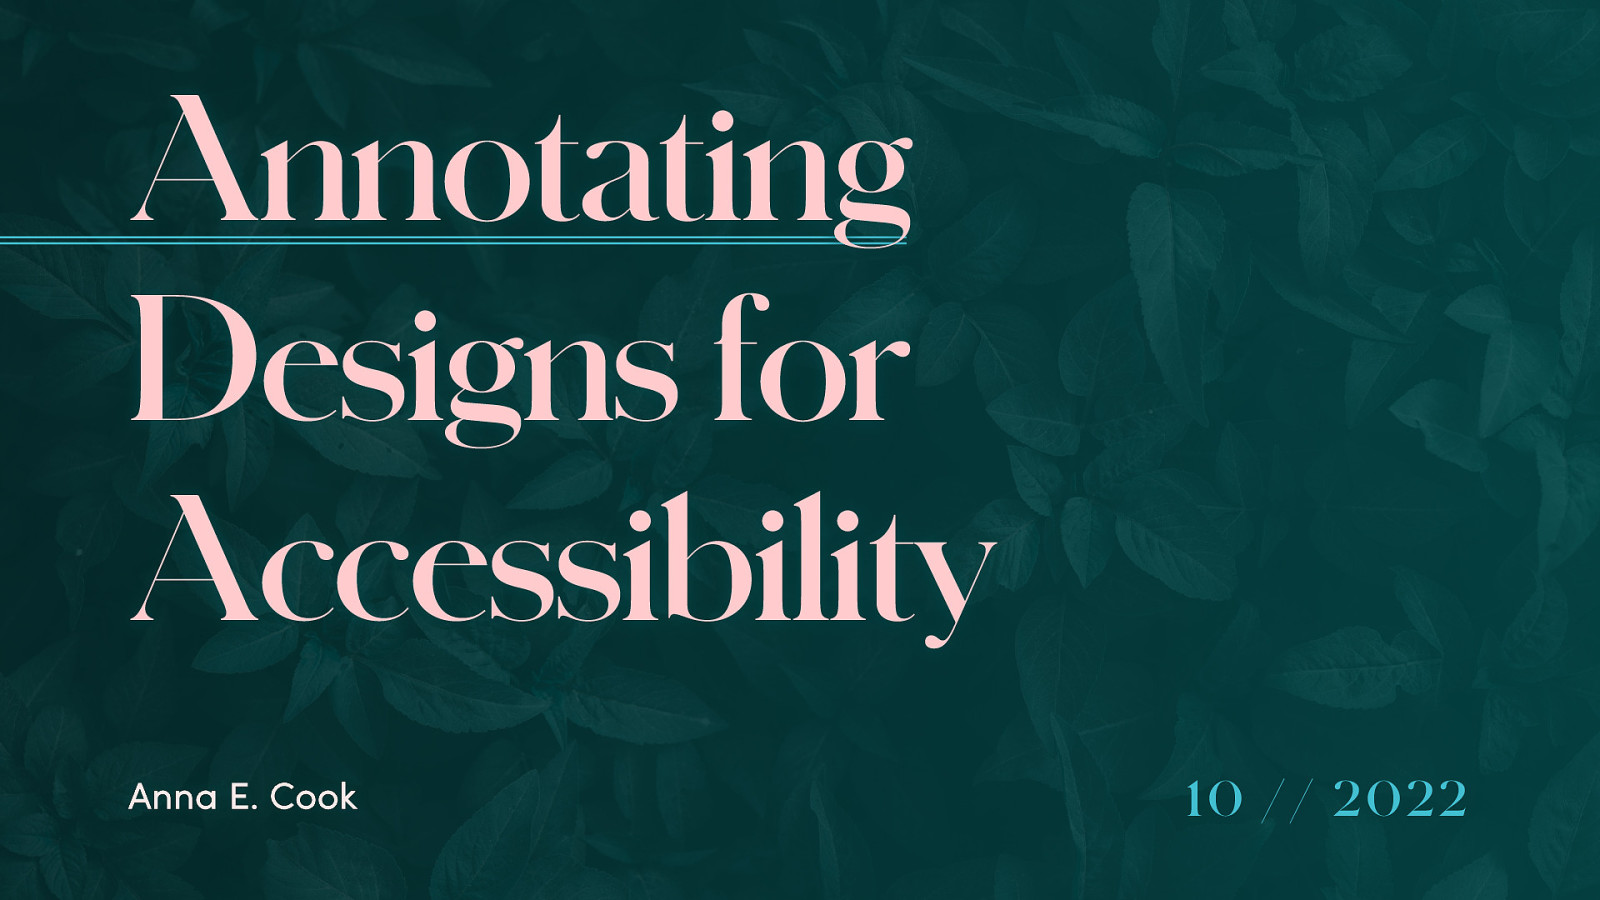 Annotating Designs for Accessibility by Anna E. Cook